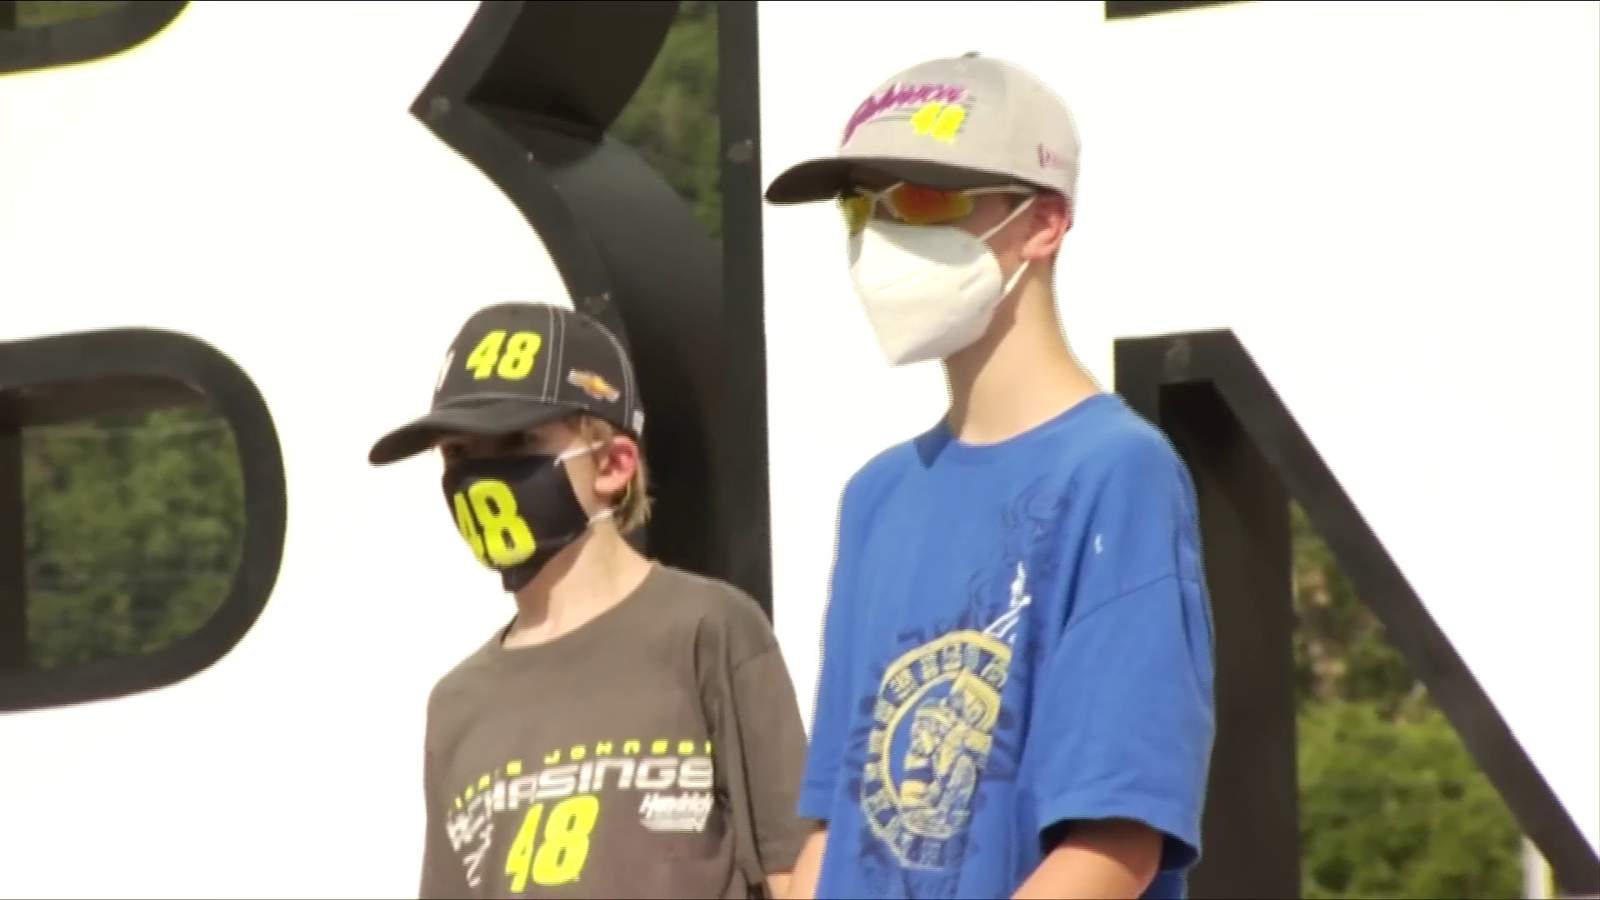 NASCAR welcomes fans back to Bristol Motor Speedway with masks, social distancing required